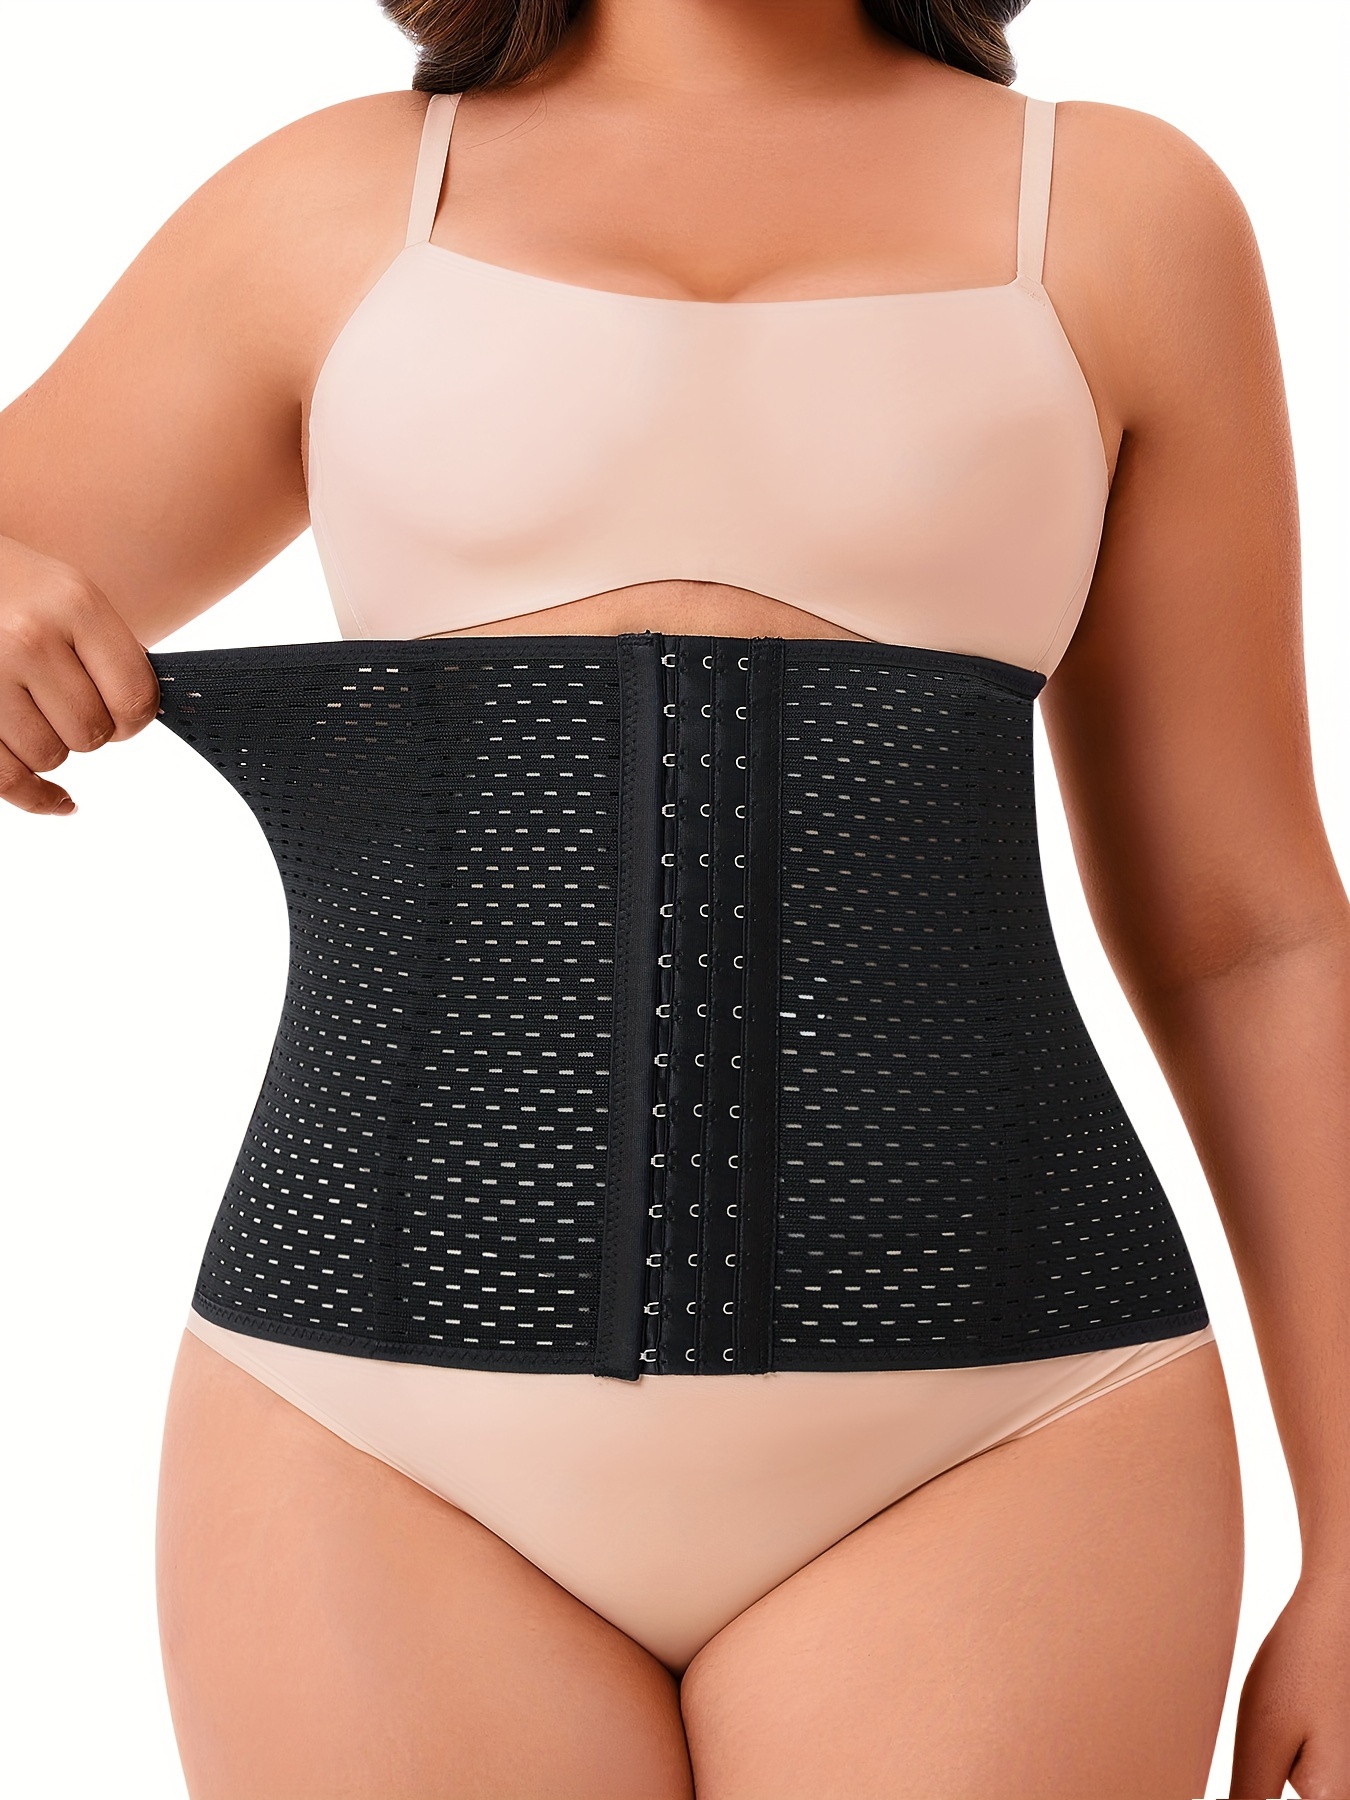 Waist Trainer Body Shapewear, Tummy Control Slimming Belly Girdle For  Fitness Weight Loss, Postpartum Waist Belt